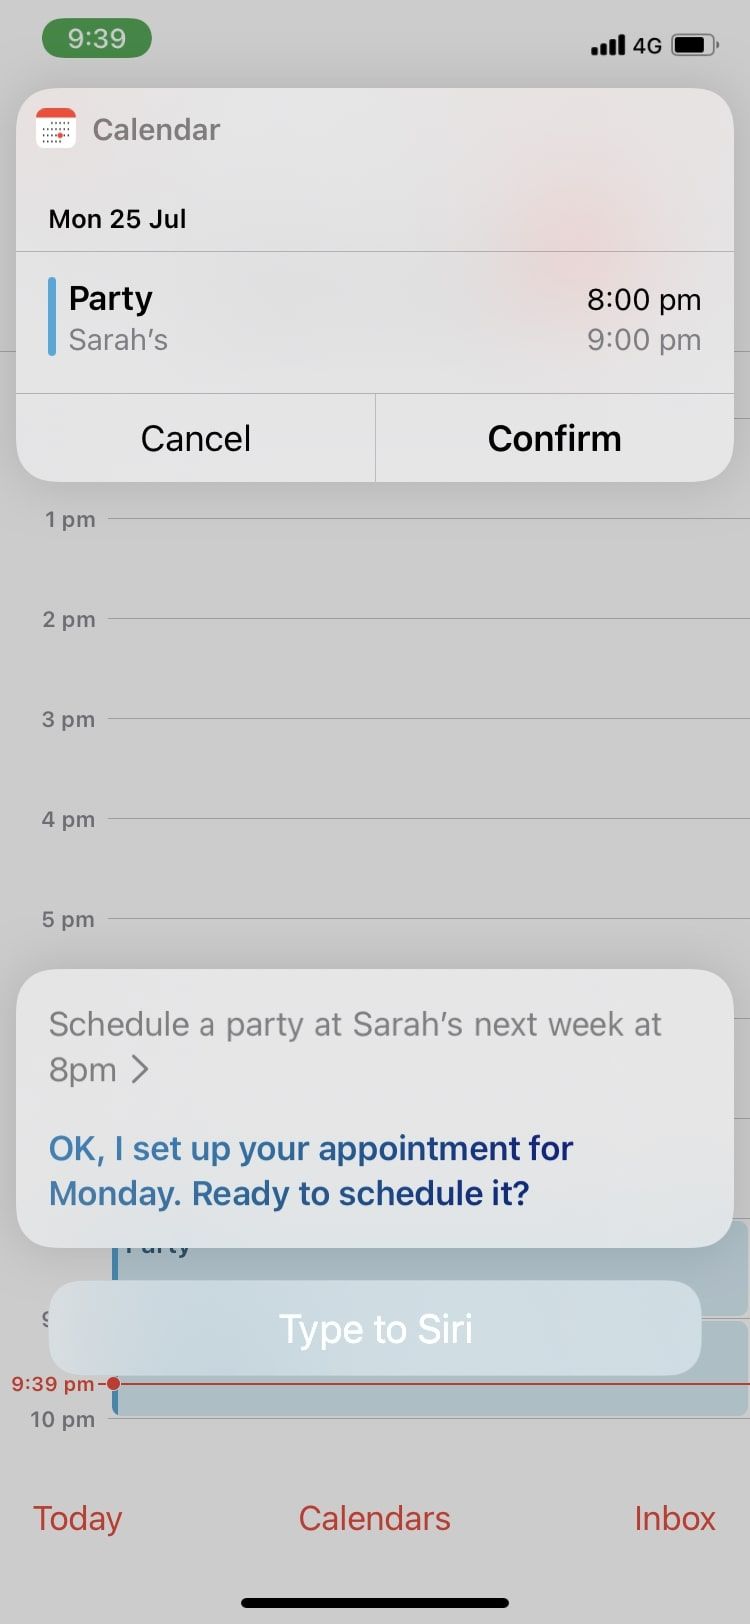 How to Get Started With the Calendar App on Your iPhone or iPad